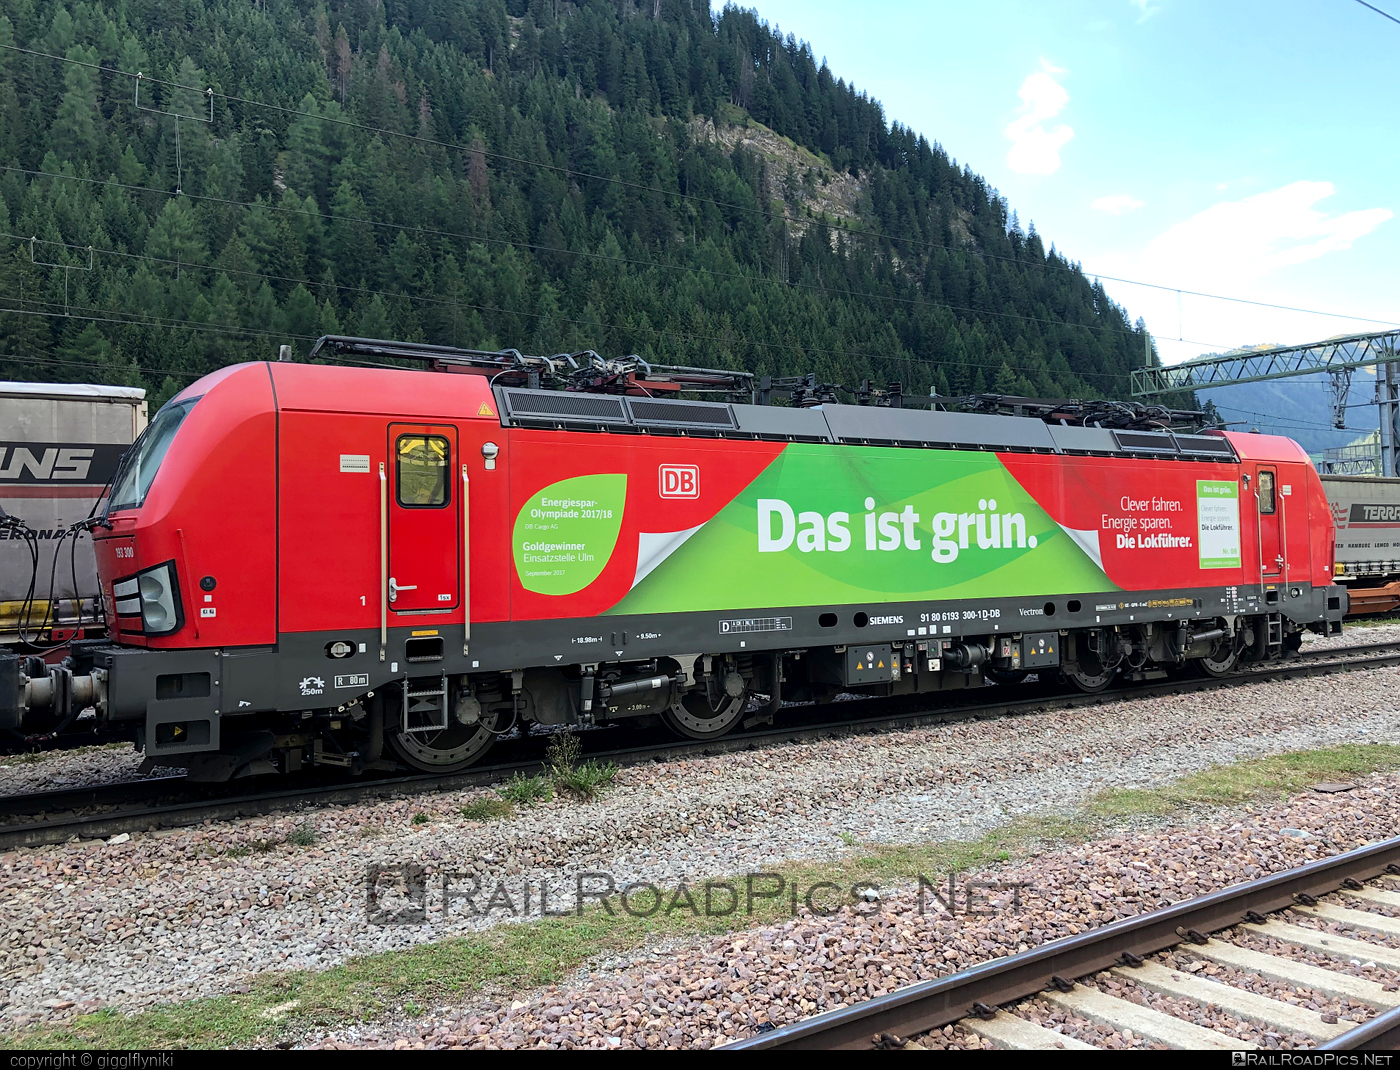 Siemens Vectron MS - 193 300 operated by DB Cargo AG #db #dbcargo #dbcargoag #deutschebahn #siemens #siemensvectron #siemensvectronms #vectron #vectronms